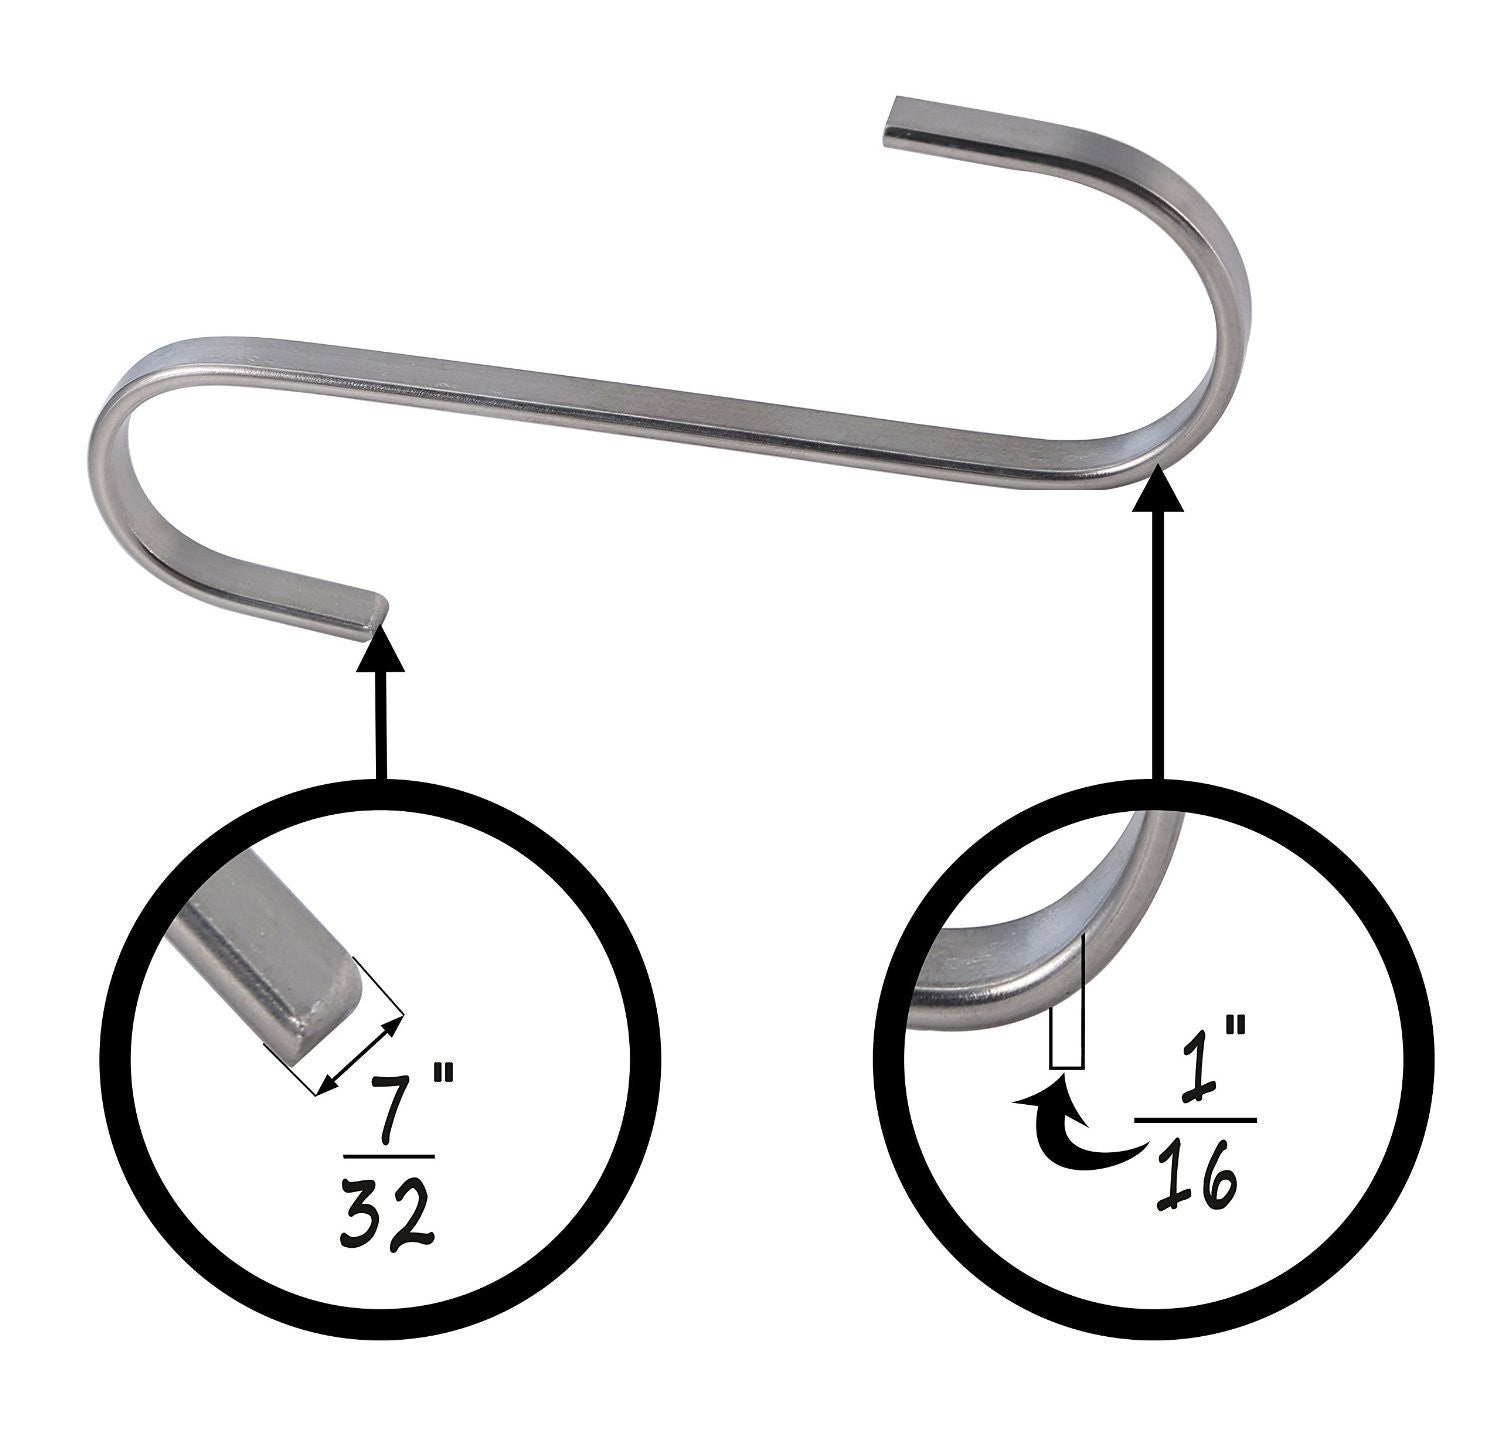 8 Inch S Hooks Heavy Duty 6 Pack Extra Large Metal S Shaped Hooks